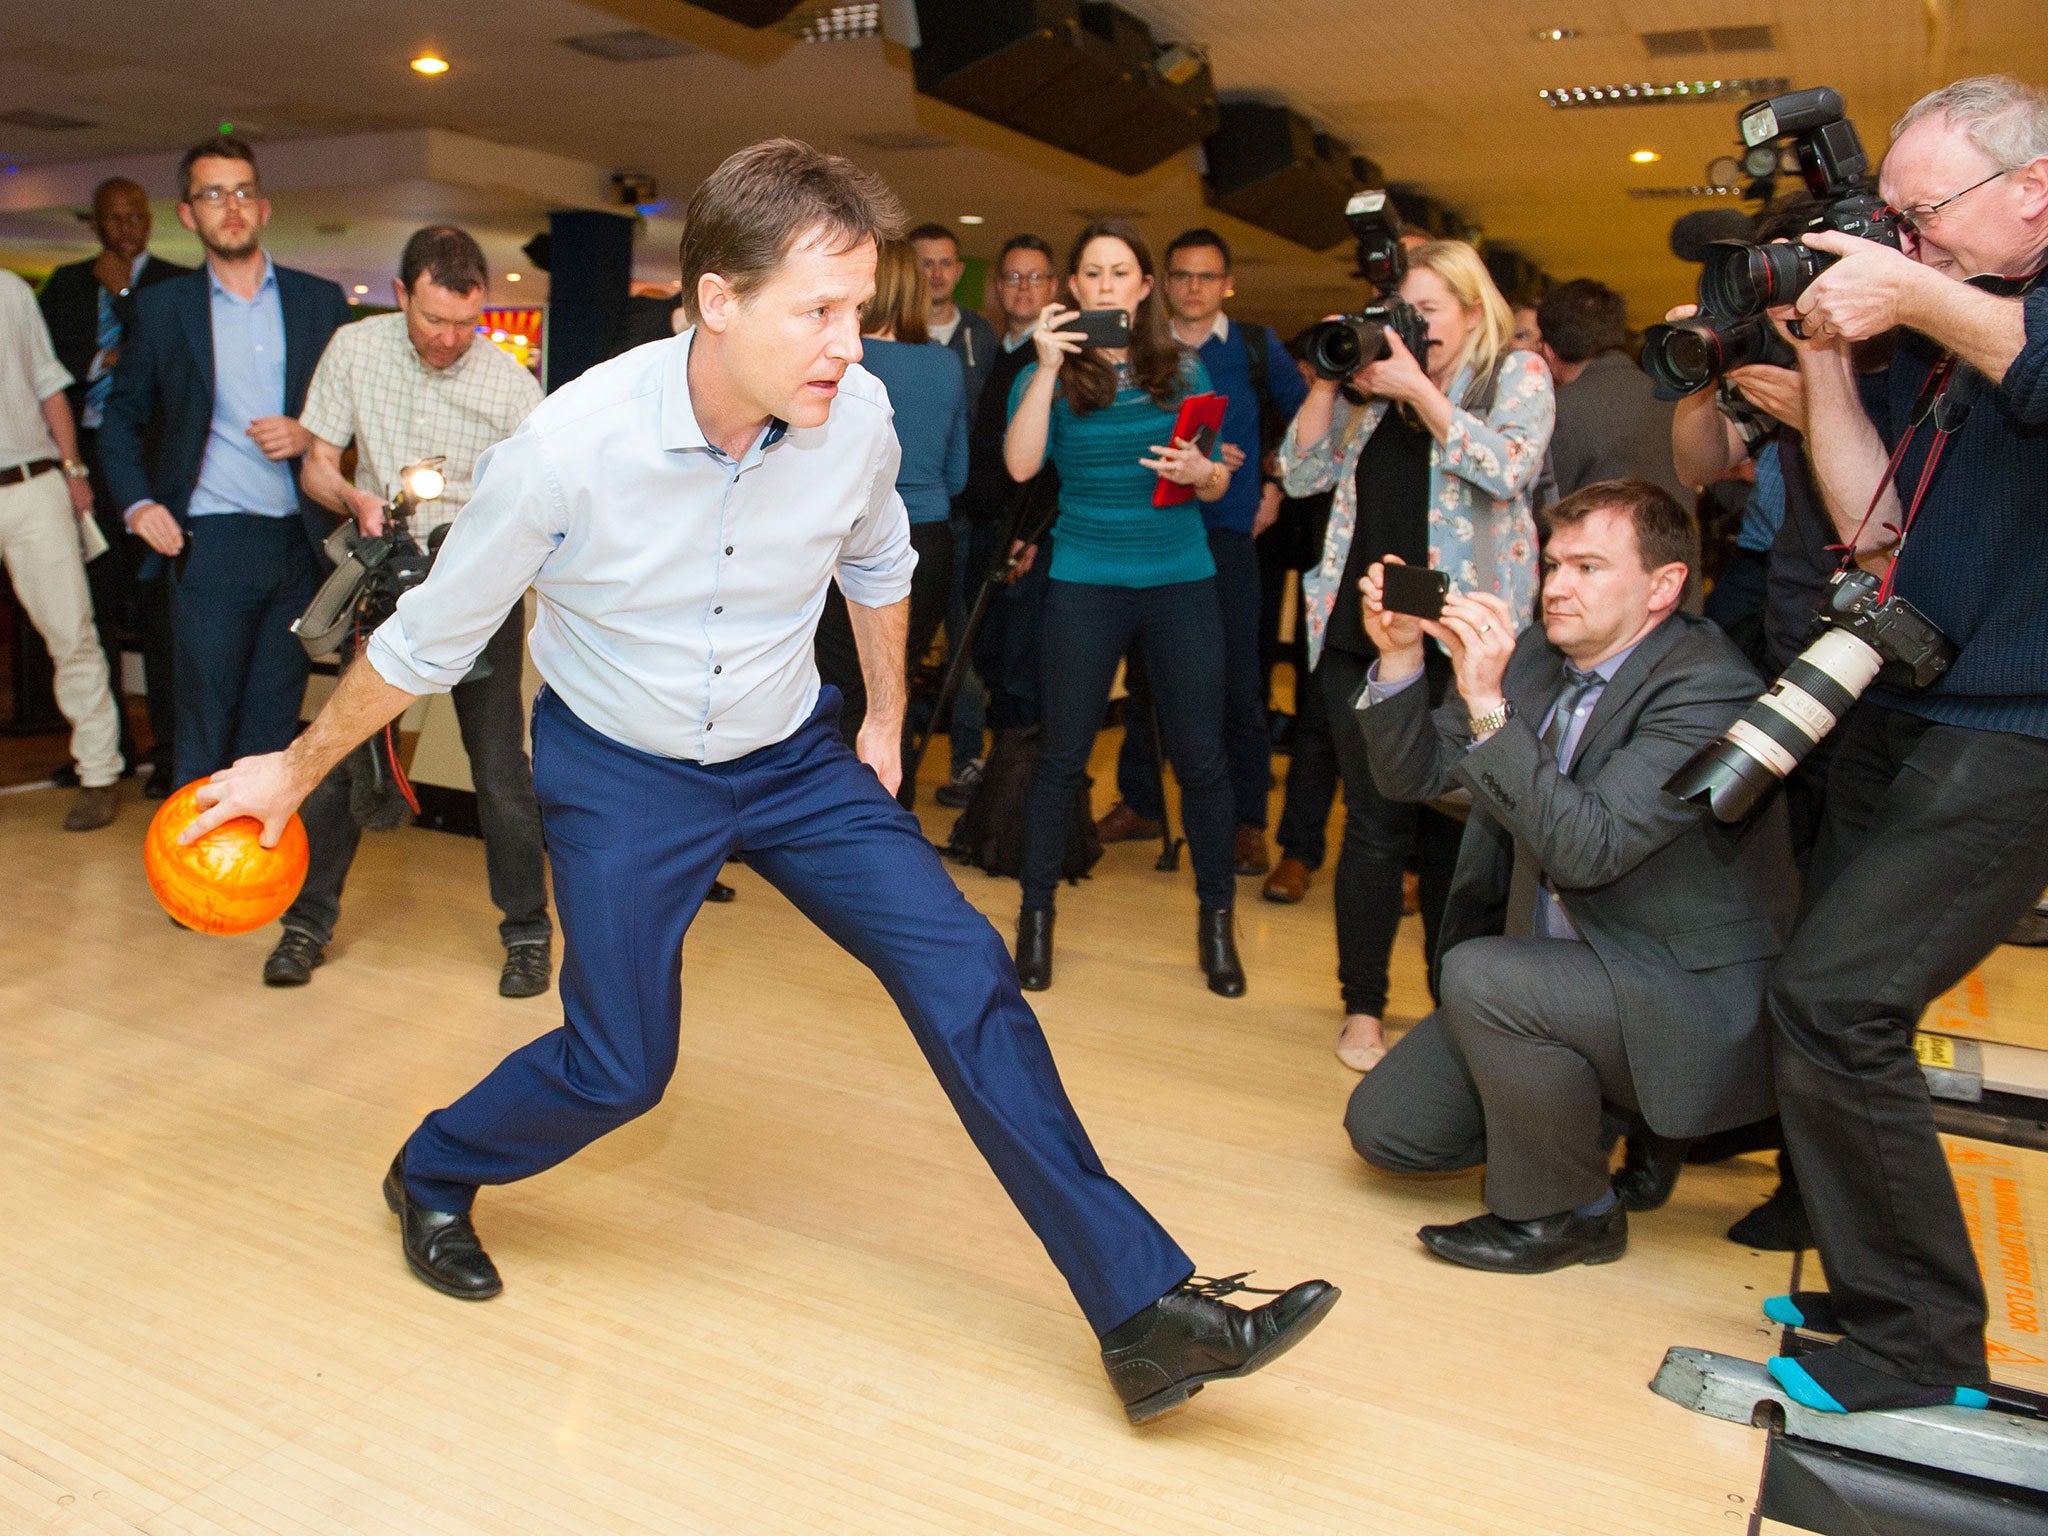 Nick Clegg shows off his prowess in the bowling alley during a campaign visit to Colchester